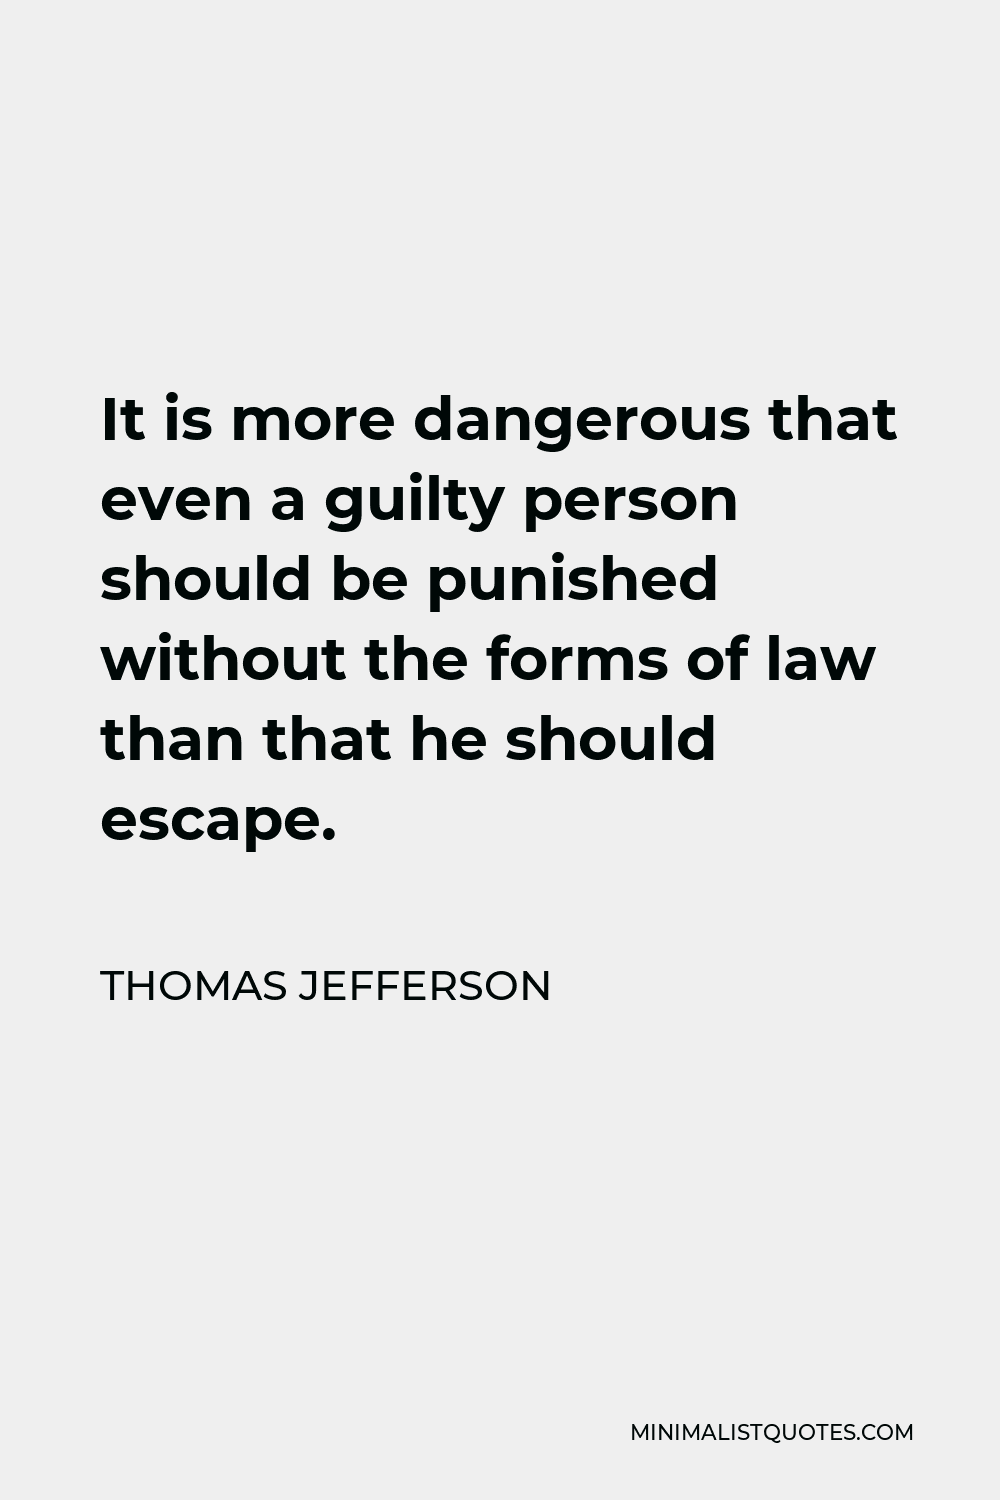 Thomas Jefferson Quote - It is more dangerous that even a guilty person should be punished without the forms of law than that he should escape.